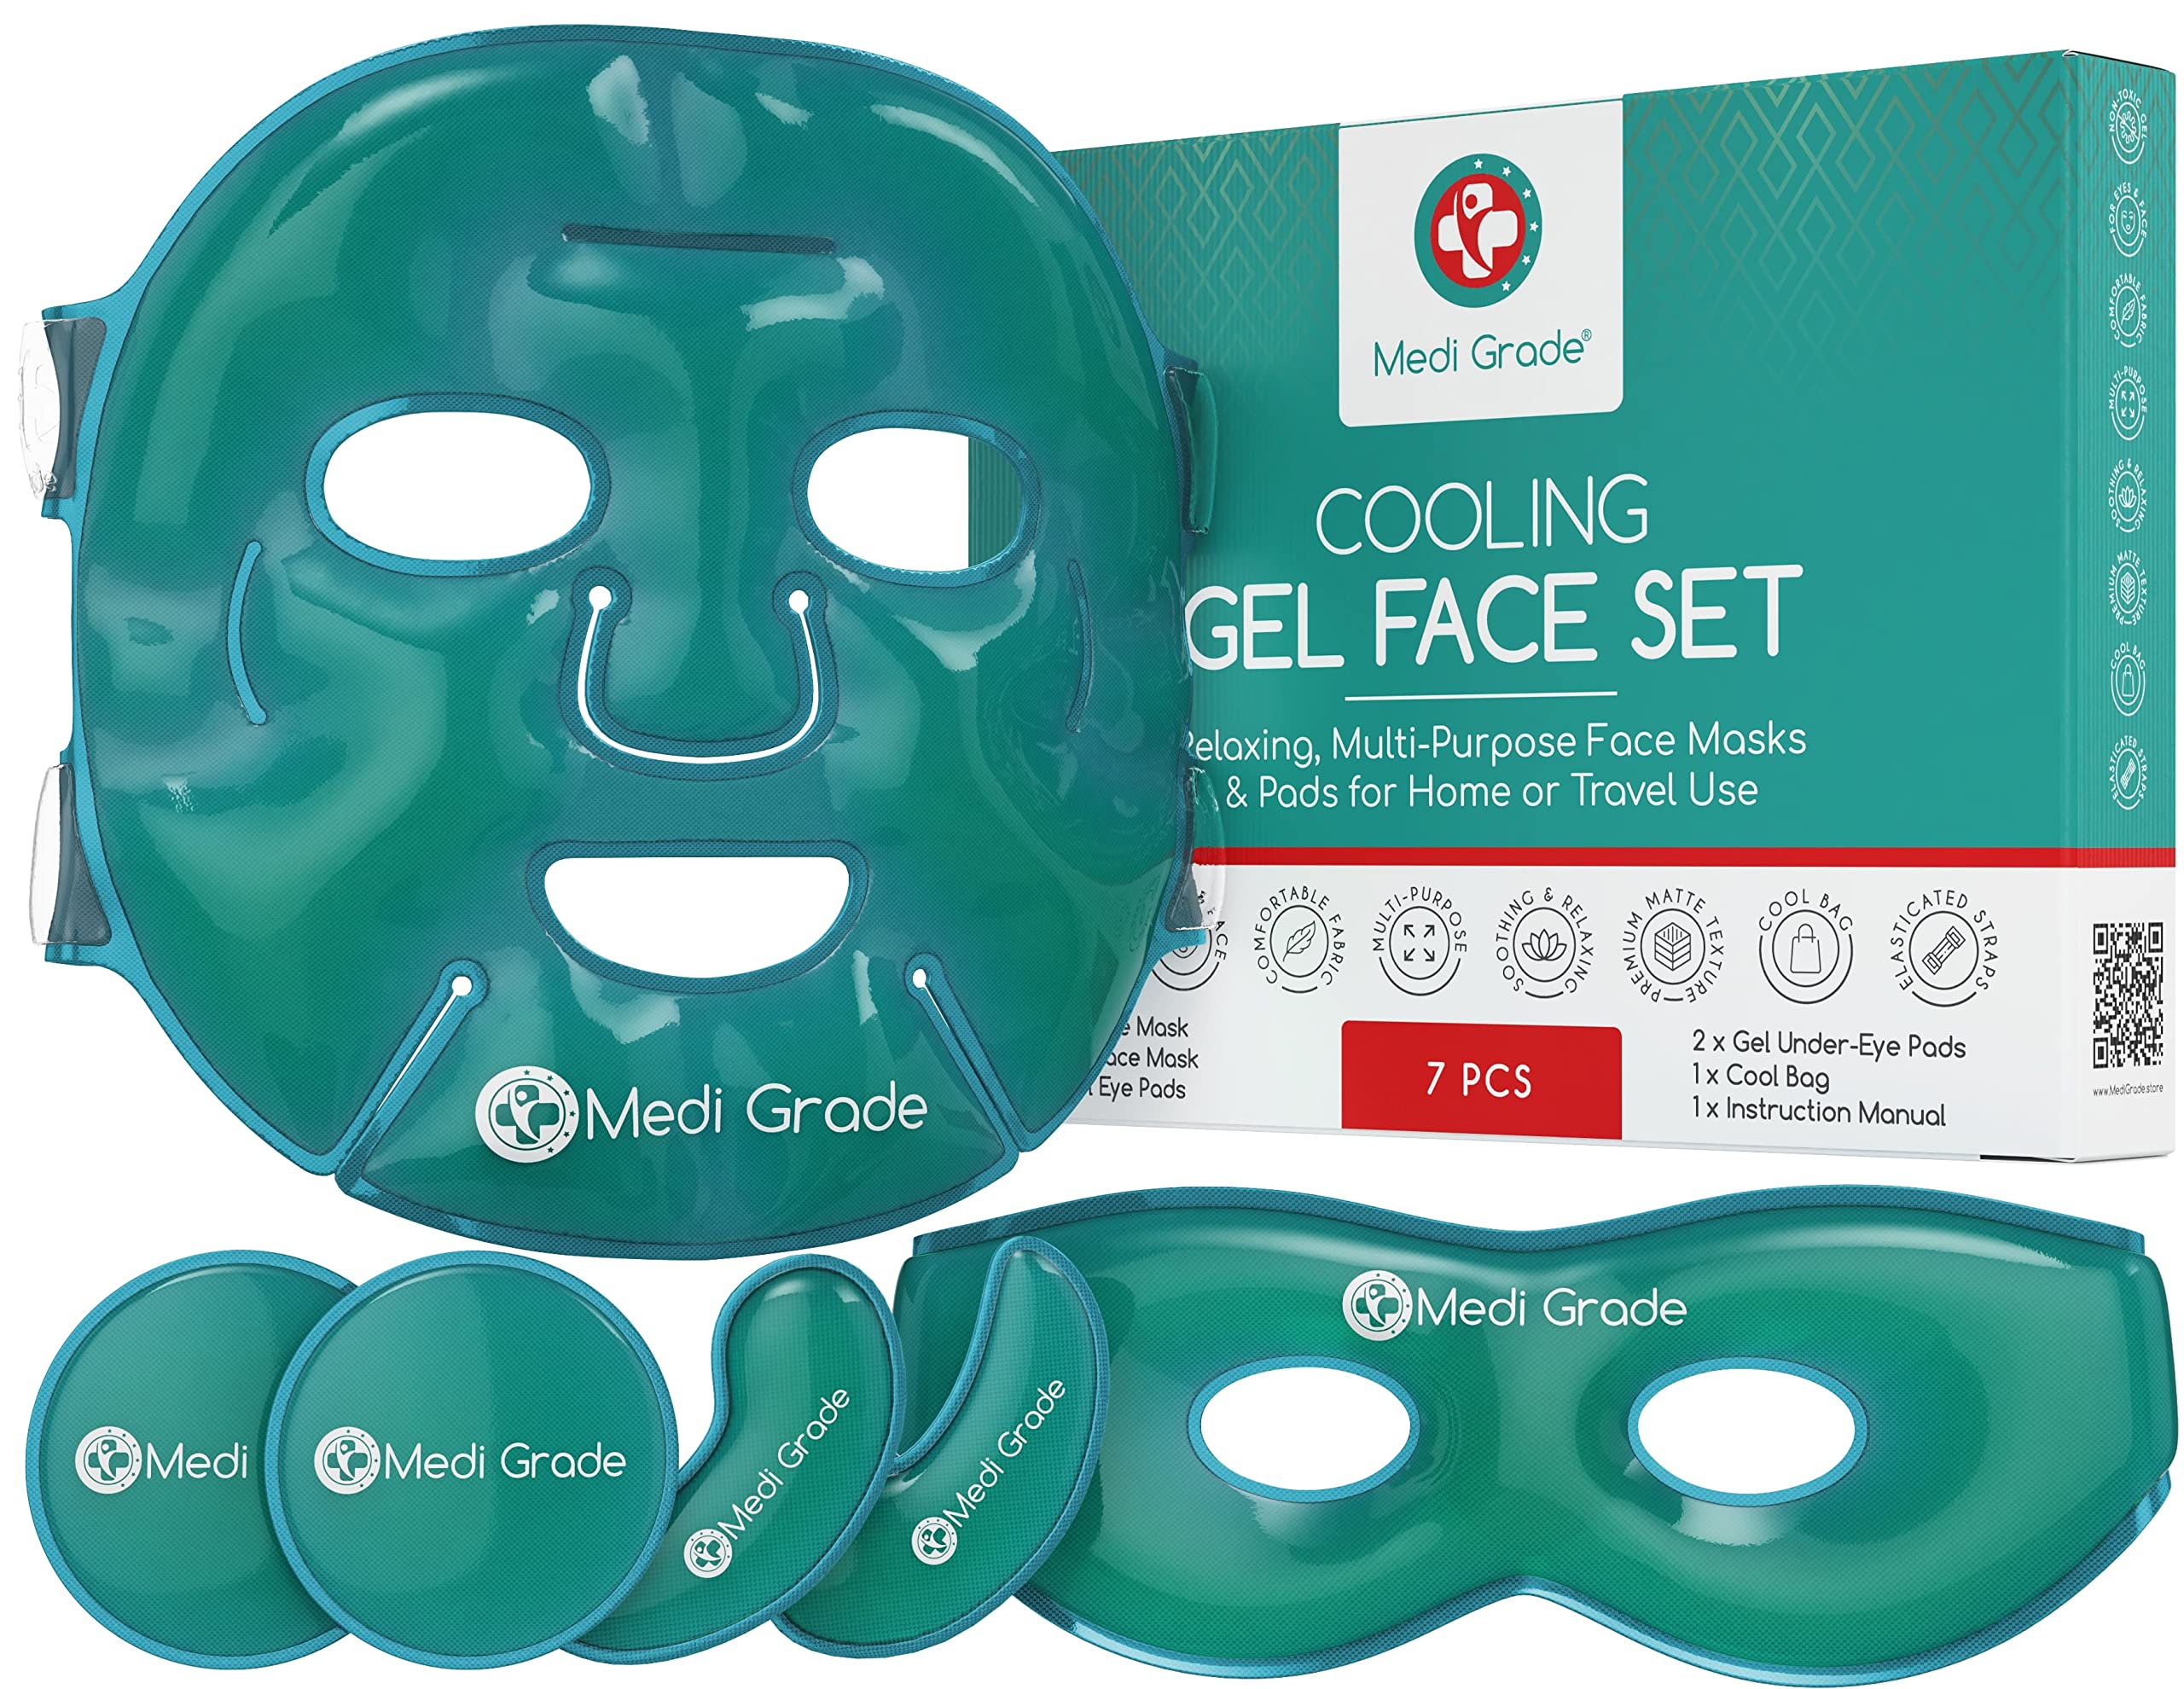 Medi Grade Cooling Face Mask & Cold Eye Mask Set - Soothing Face Ice Pack with Gel Ice Face Mask, Freezer Eye Mask & 4 Eye Ice Packs. Reduce Puffy Eyes and Dark Circles with this Frozen Face Mask Set